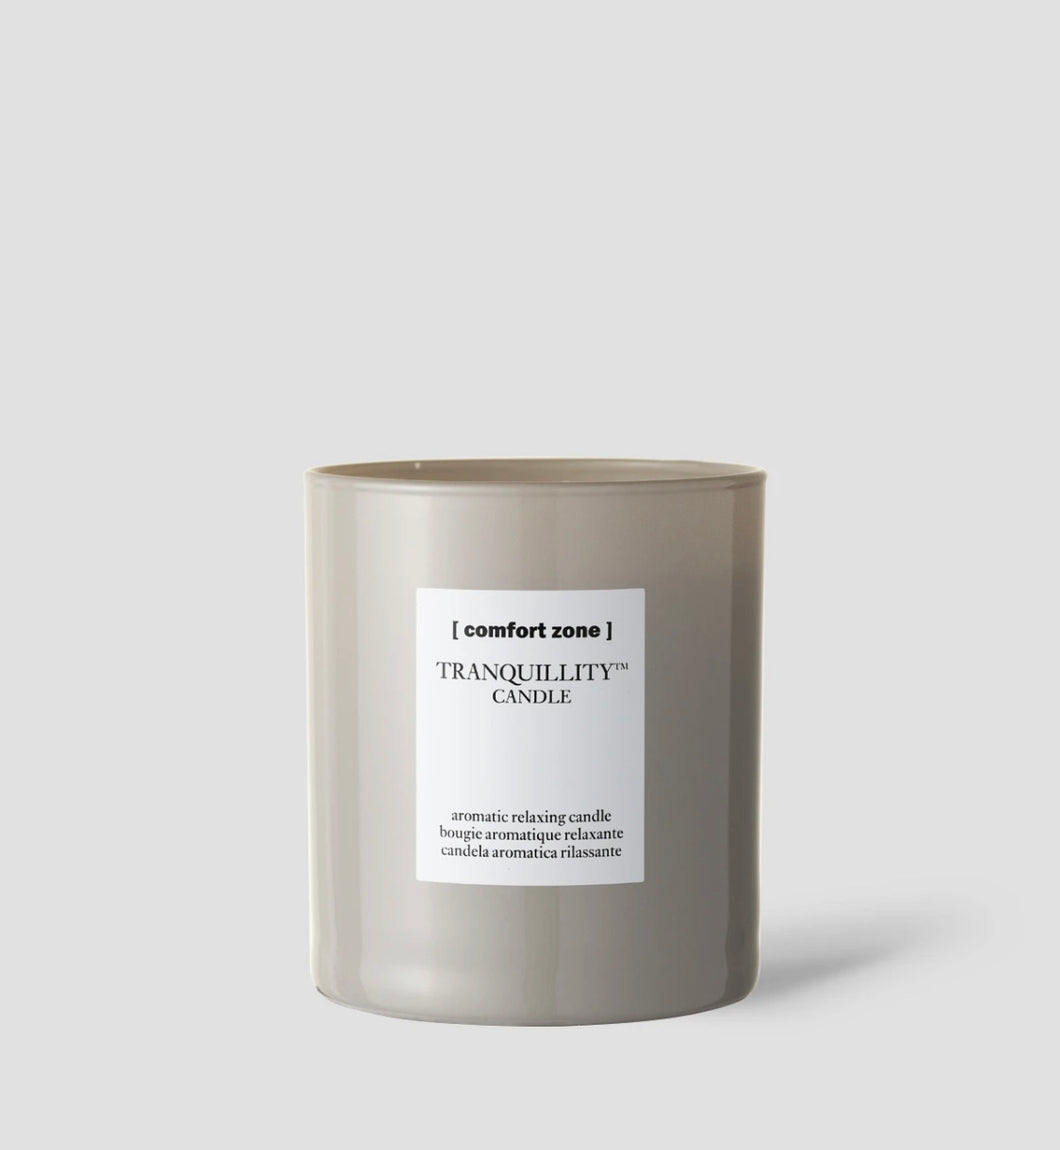 TRANQUILLITY Candle [Comfort Zone]